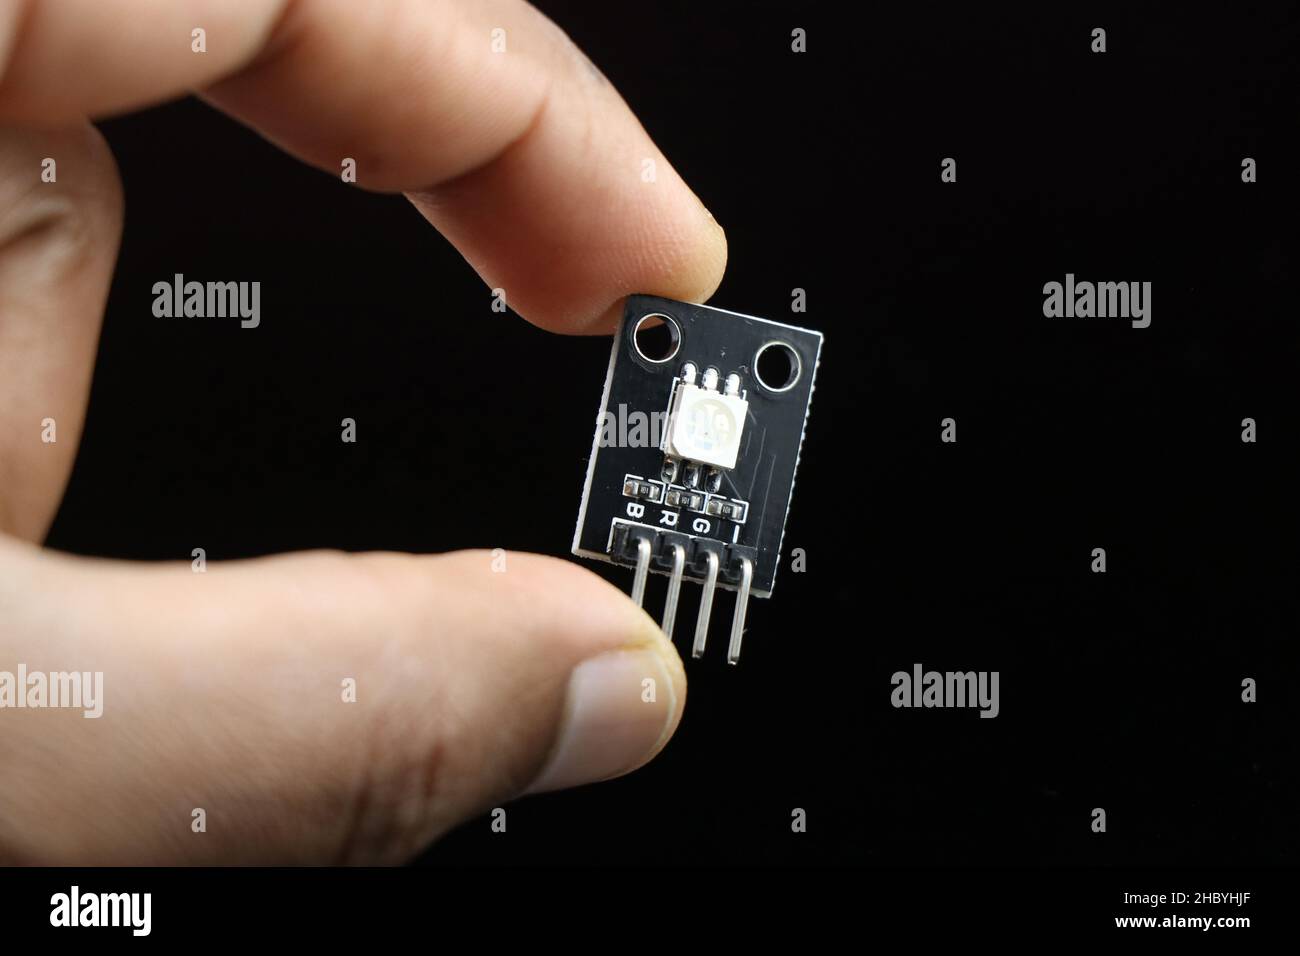 SMD RGB LED module for programmable microcontroller boards held in hand isolated on black Stock Photo